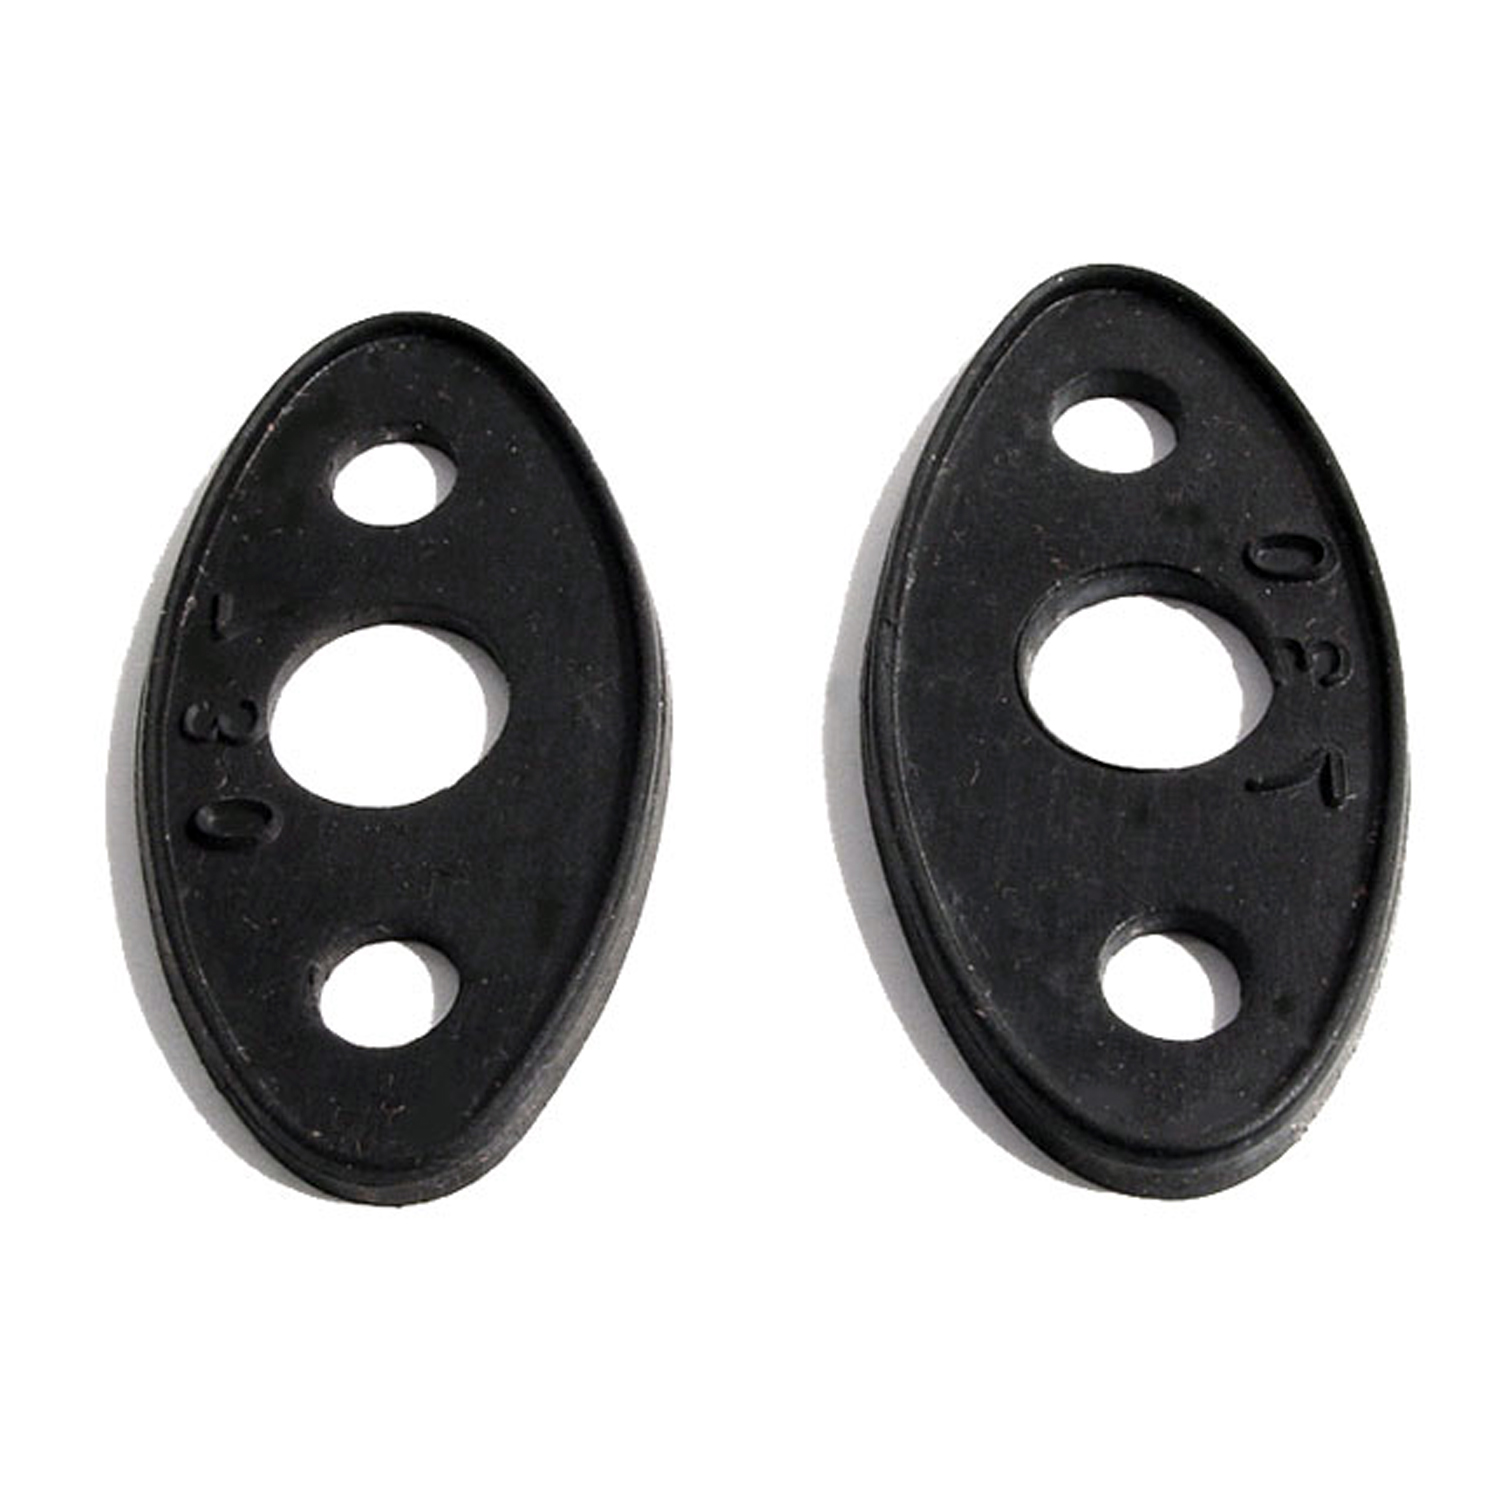 1936 Ford Model 68 Door Handle Pads.  1-3/8 wide X 2-5/8 long.  Pair-MP 730